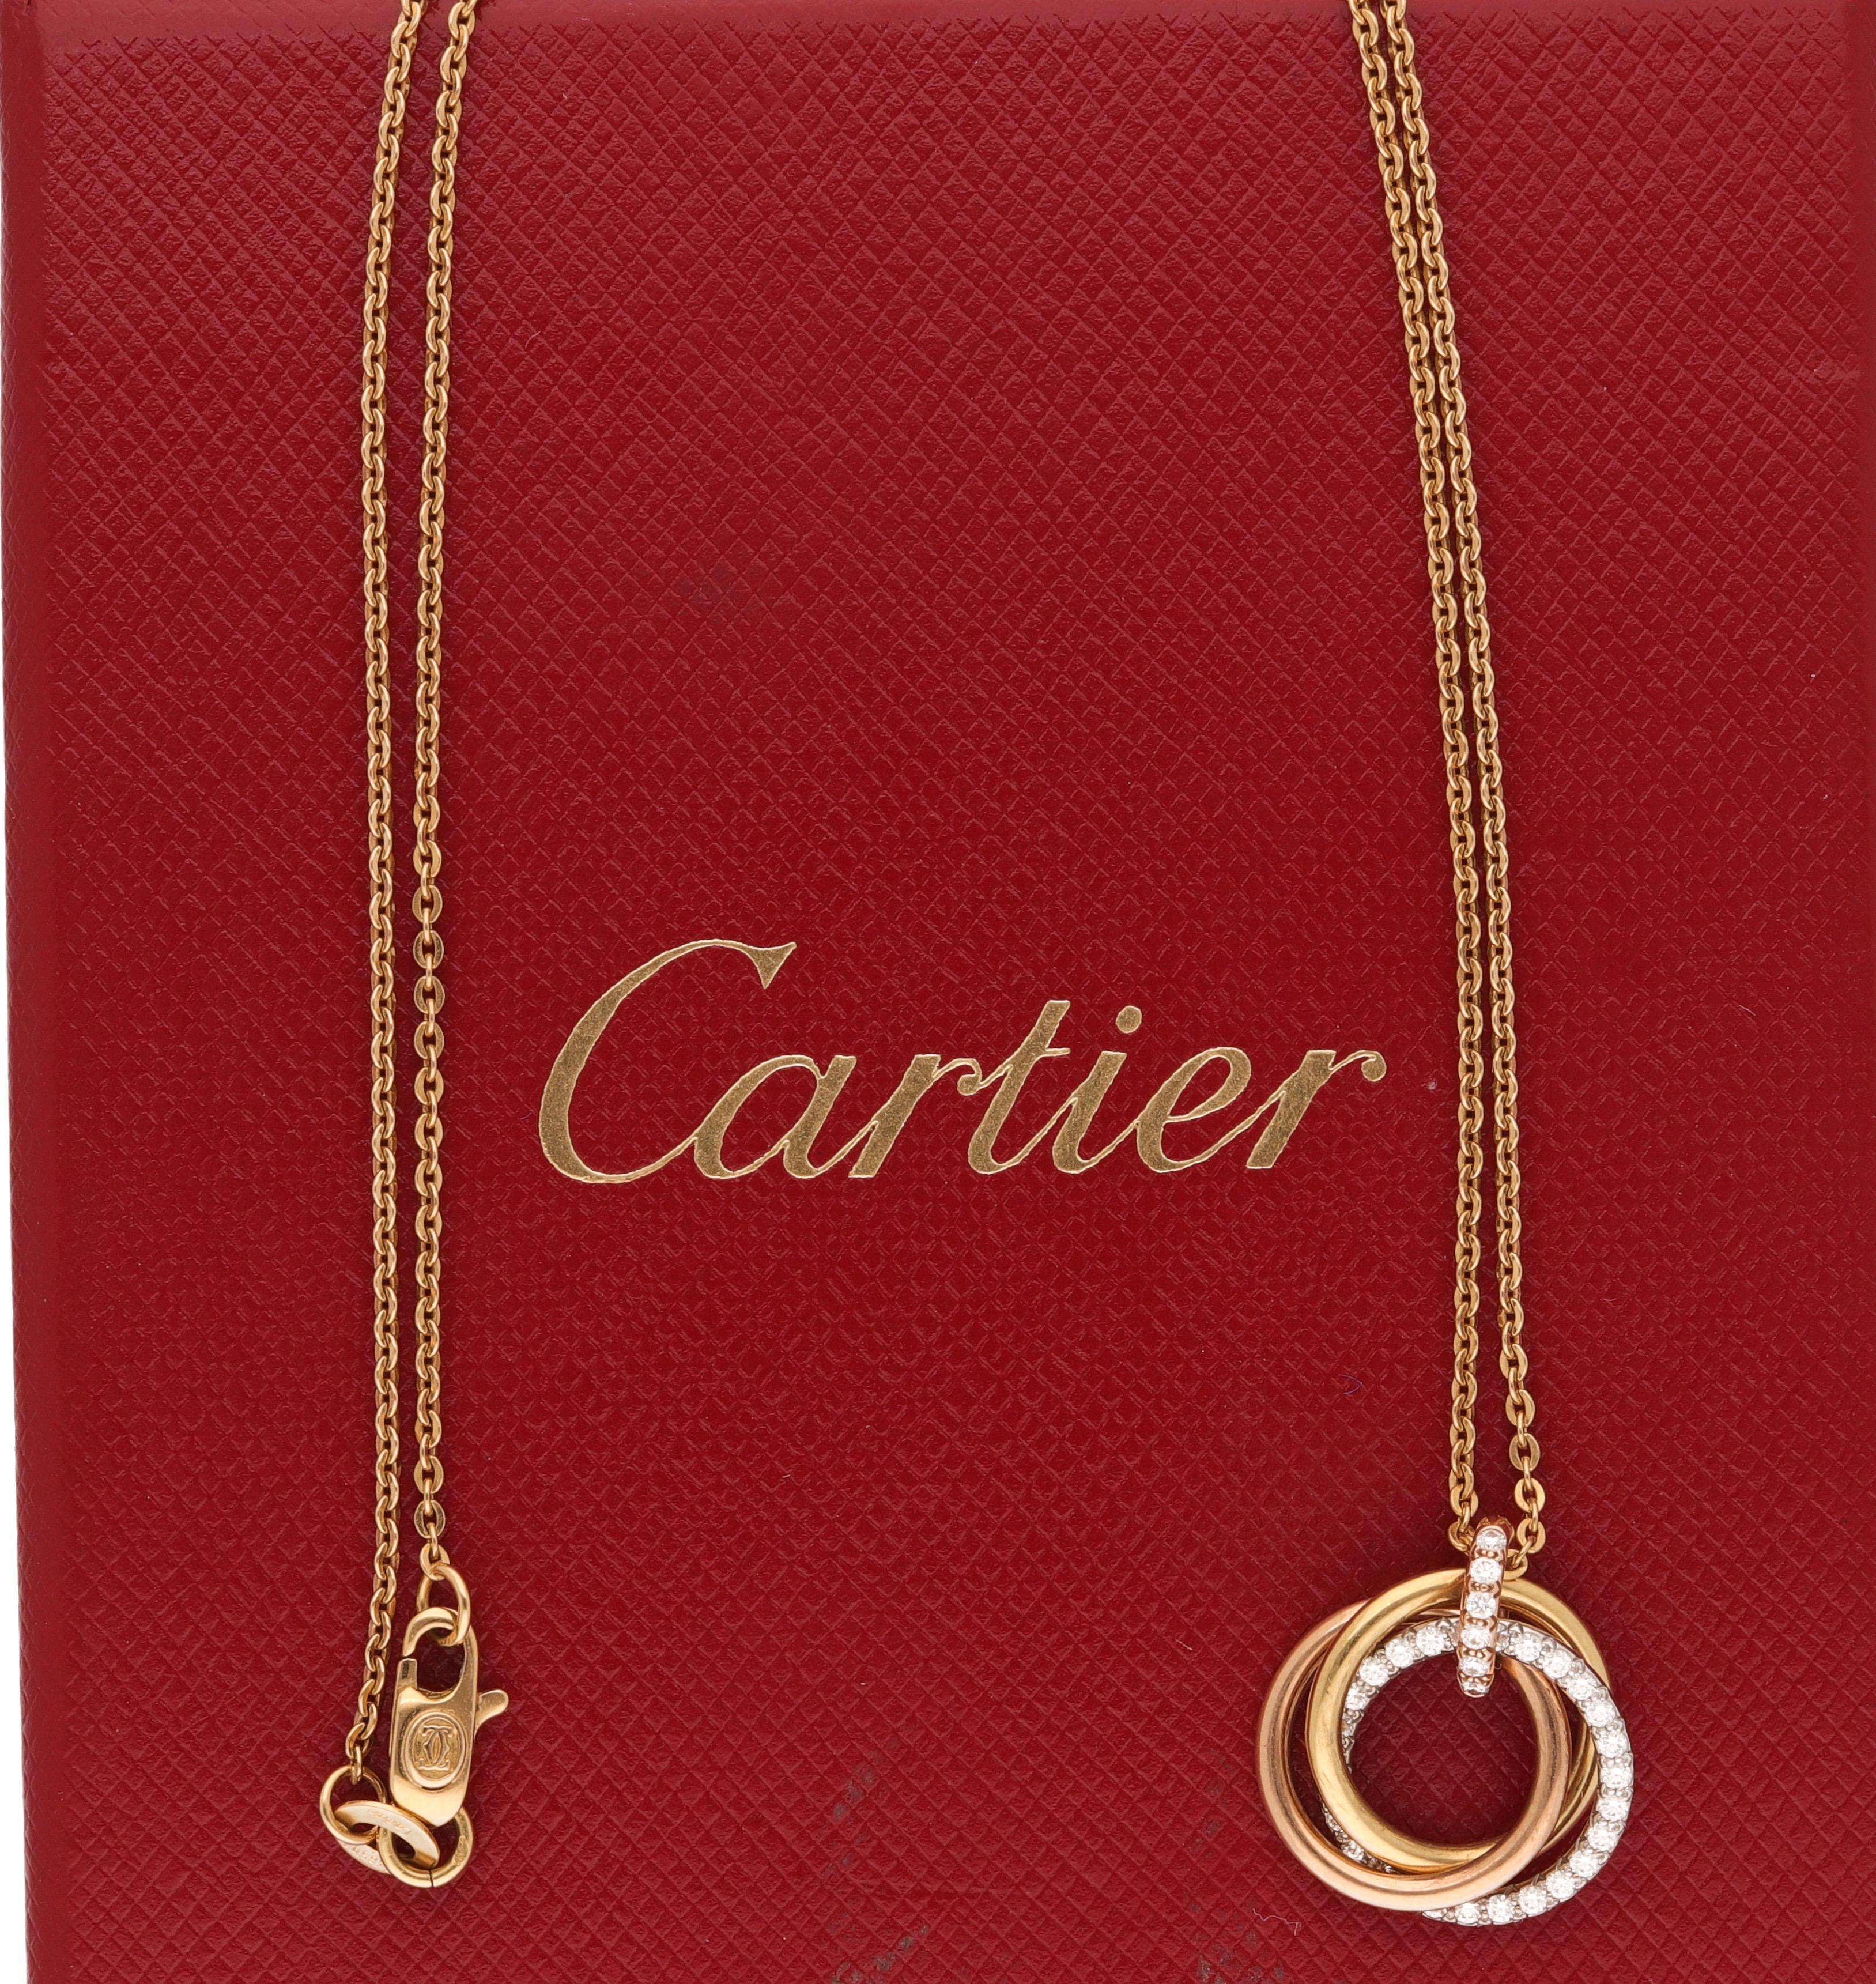 Three tone 18 karat gold necklace signed by Cartier.
This iconic design is realized in 18 karat yellow, white and rose gold with 0.20 carat of round-cut diamonds.
The Trinity collection was born in 1924.
The three gold's colors represent three